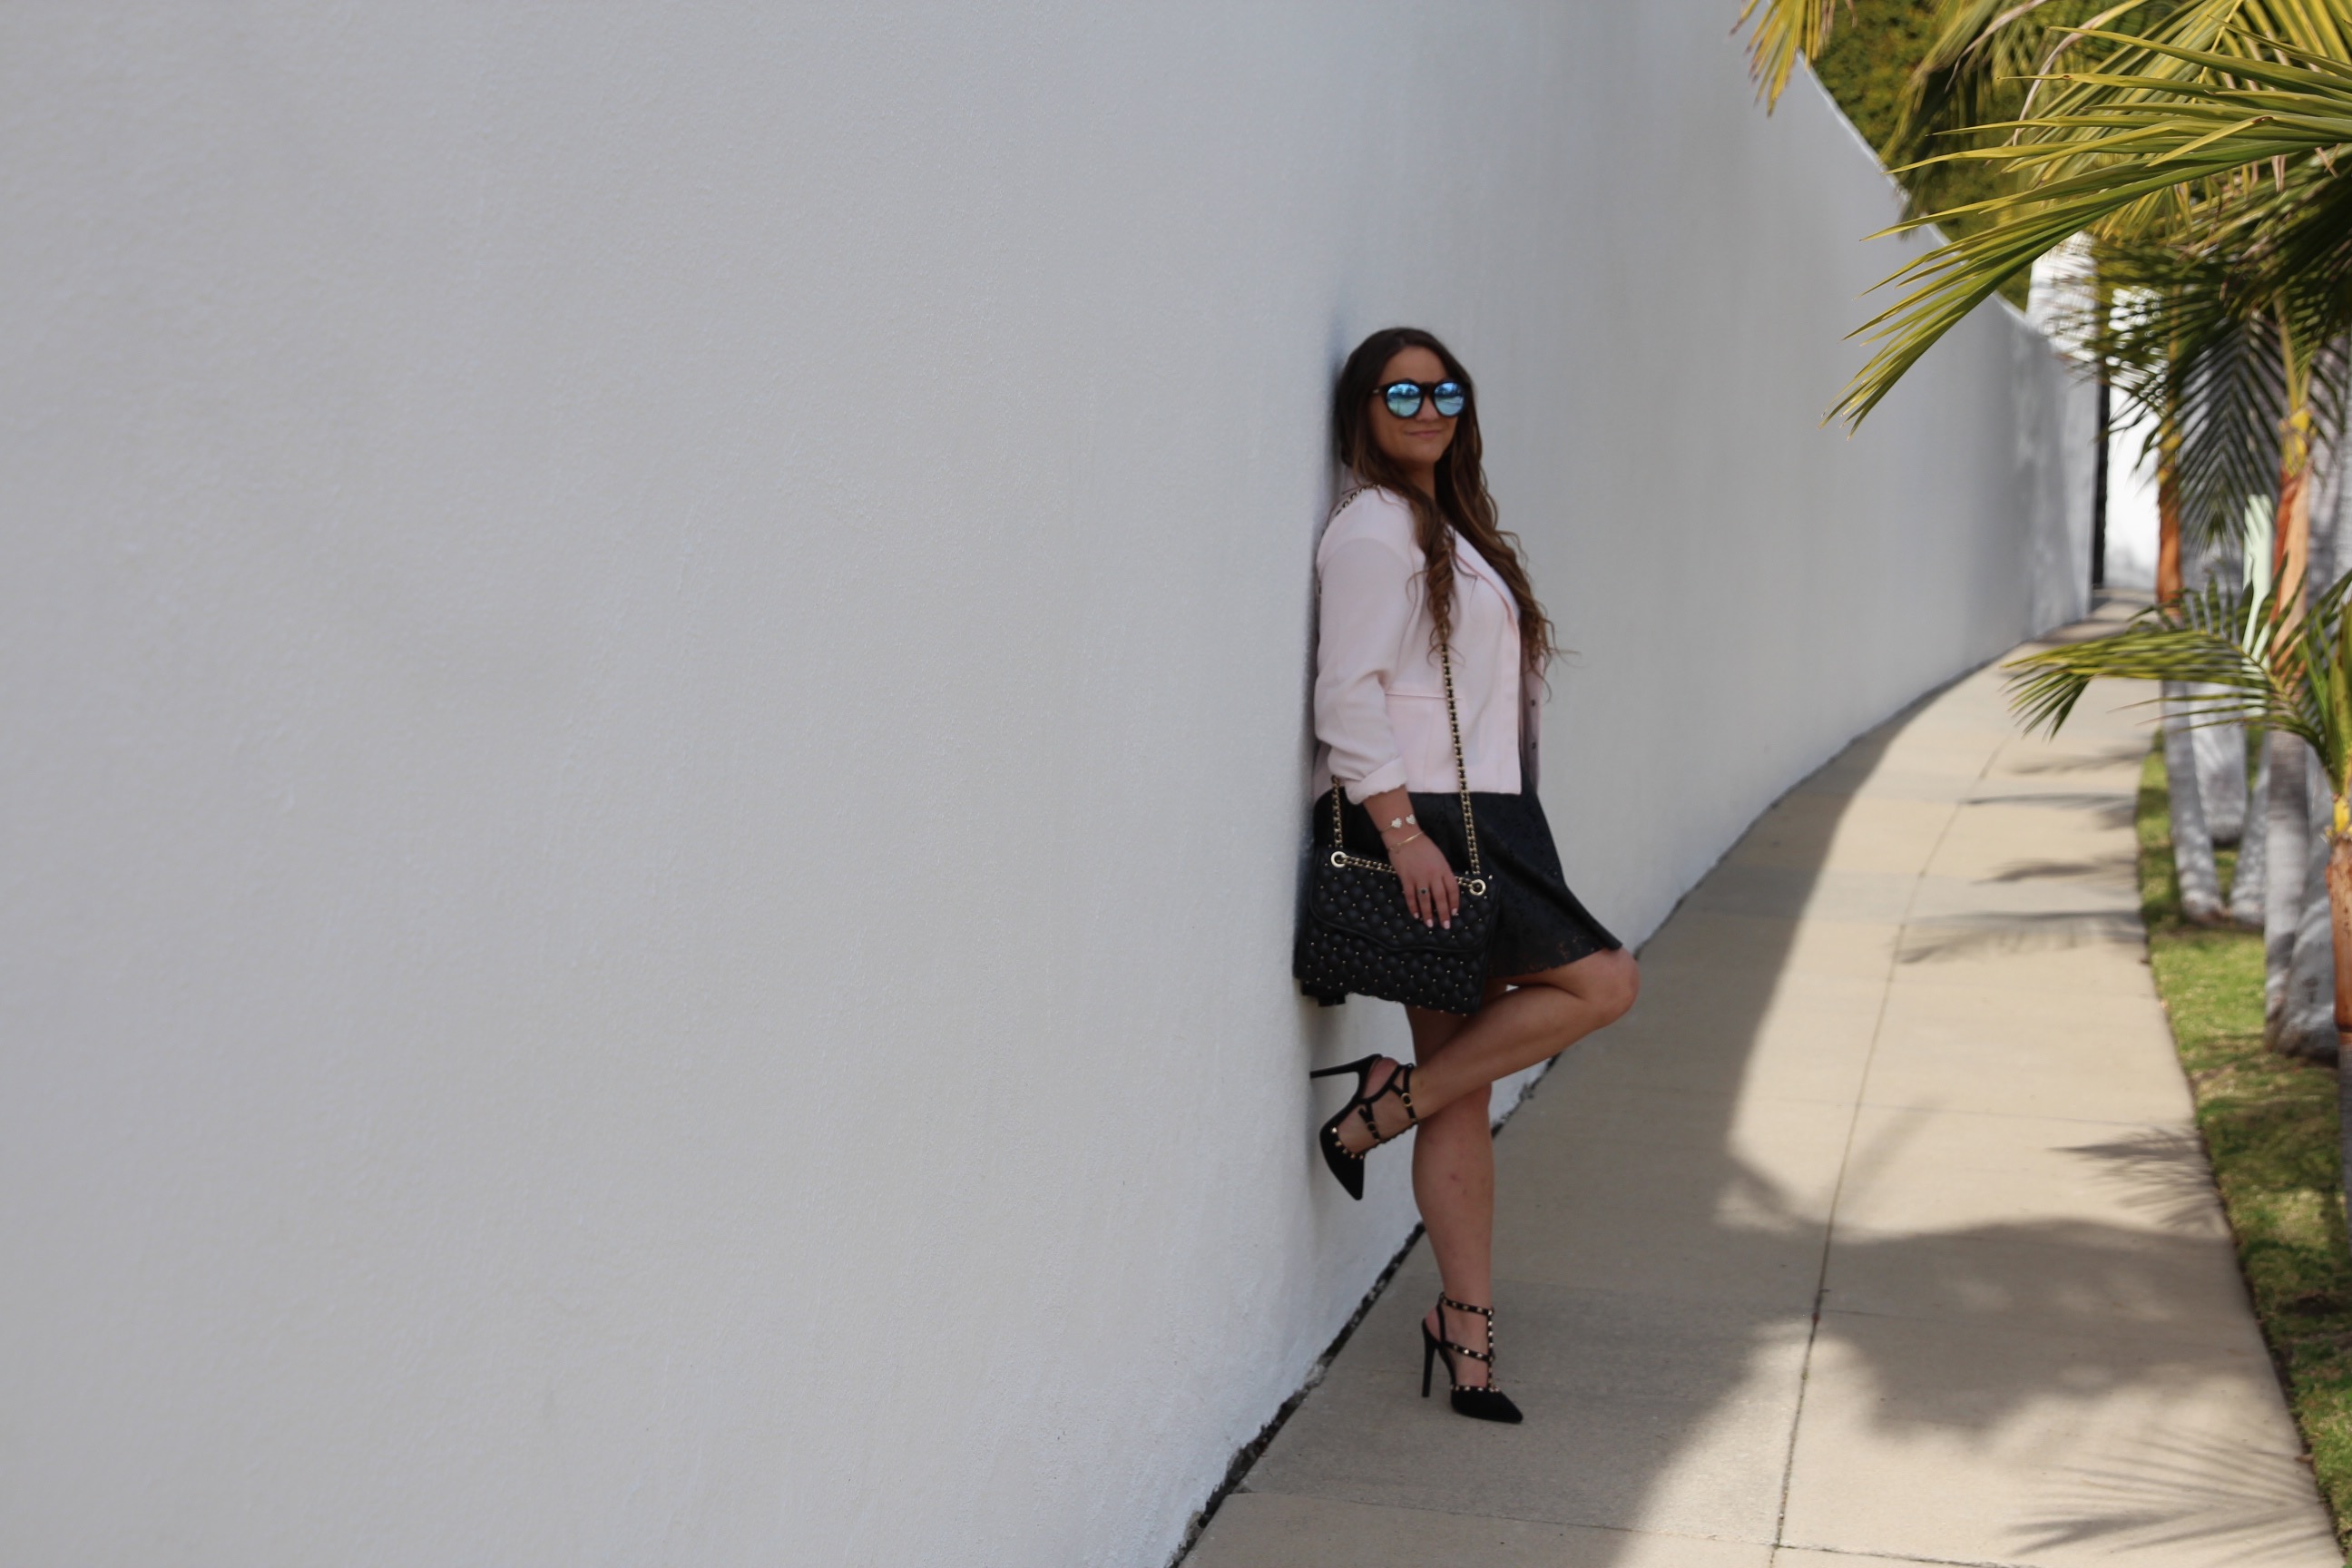 missyonmadison, fashion blog, fashion blogger, perforated skirt, black leather skirt, white crop top, white short sleeve crop top, light pink moto jacket, black studded heels, rockstud heels, look for less, le specs sunglasses, mirrored sunglasses, brunette hair, summer style, how to style a moto jacket, how to wear a leather skirt, la blogger, la style, melissa tierney,